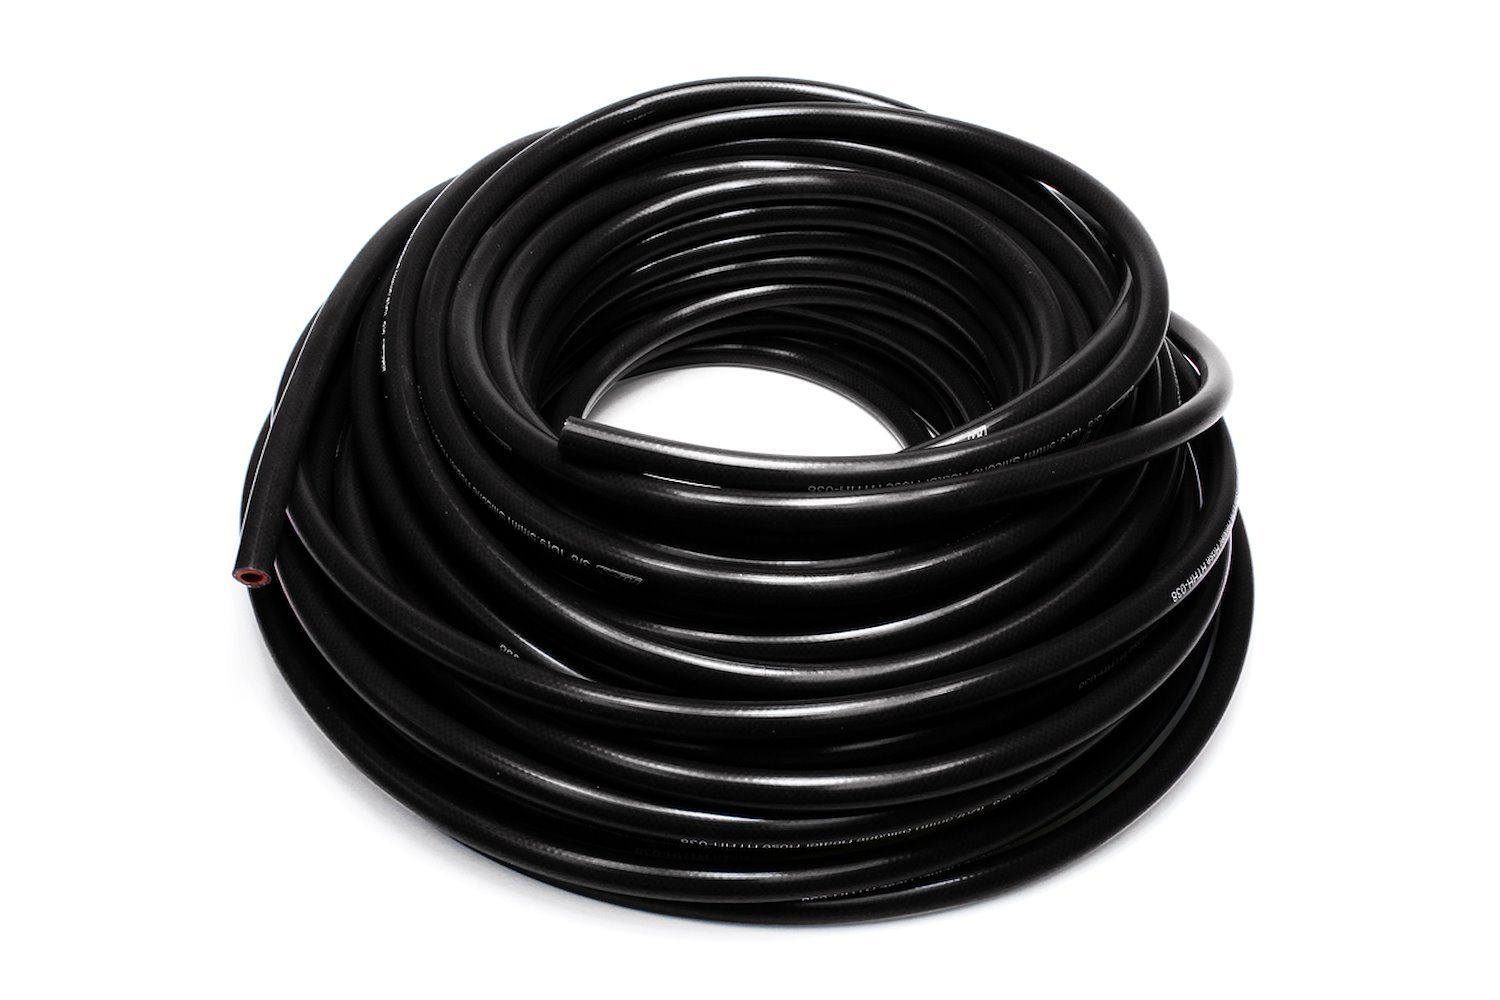 HTHH-062-BLKx100 Silicone Heater Hose Tubing, High-Temp Reinforced, 5/8 in. ID, 100 ft. Roll, Black